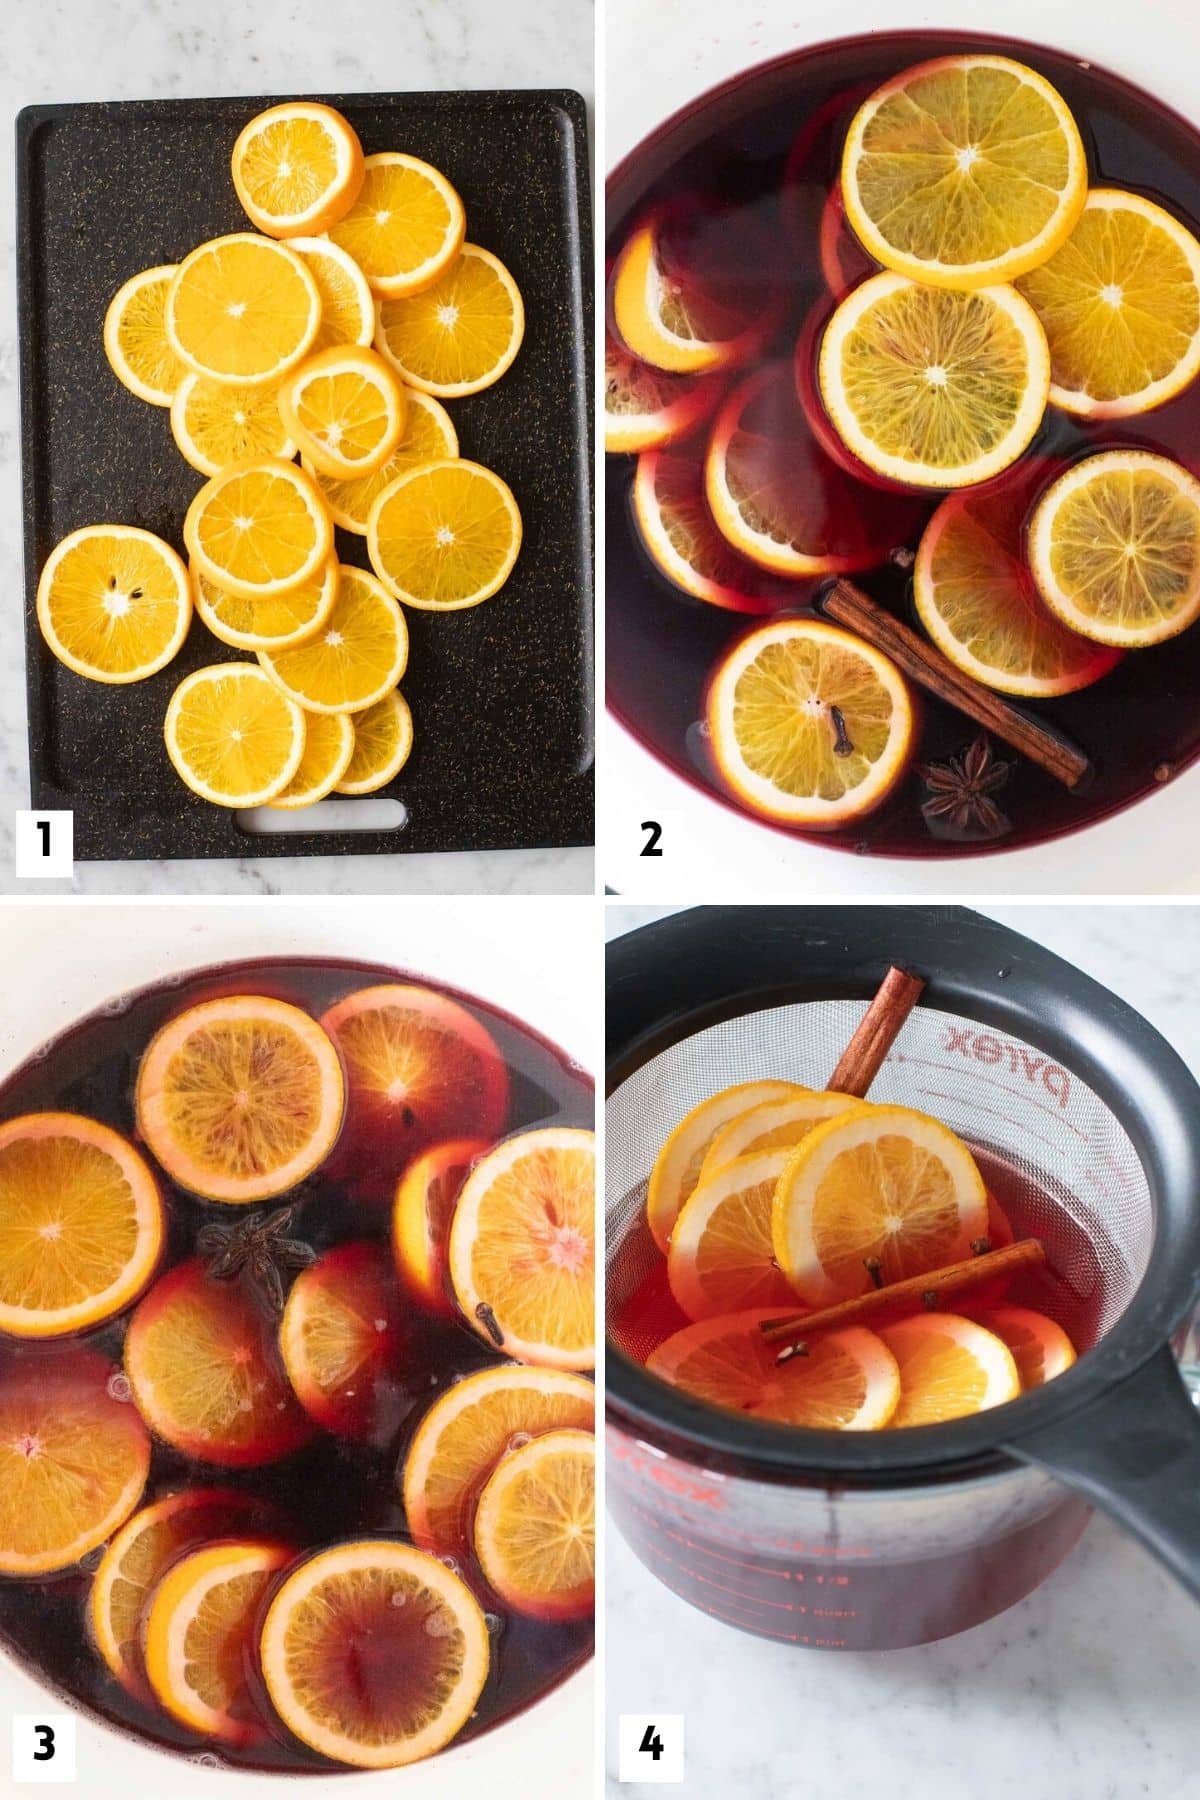 Steps for making German mulled wine.